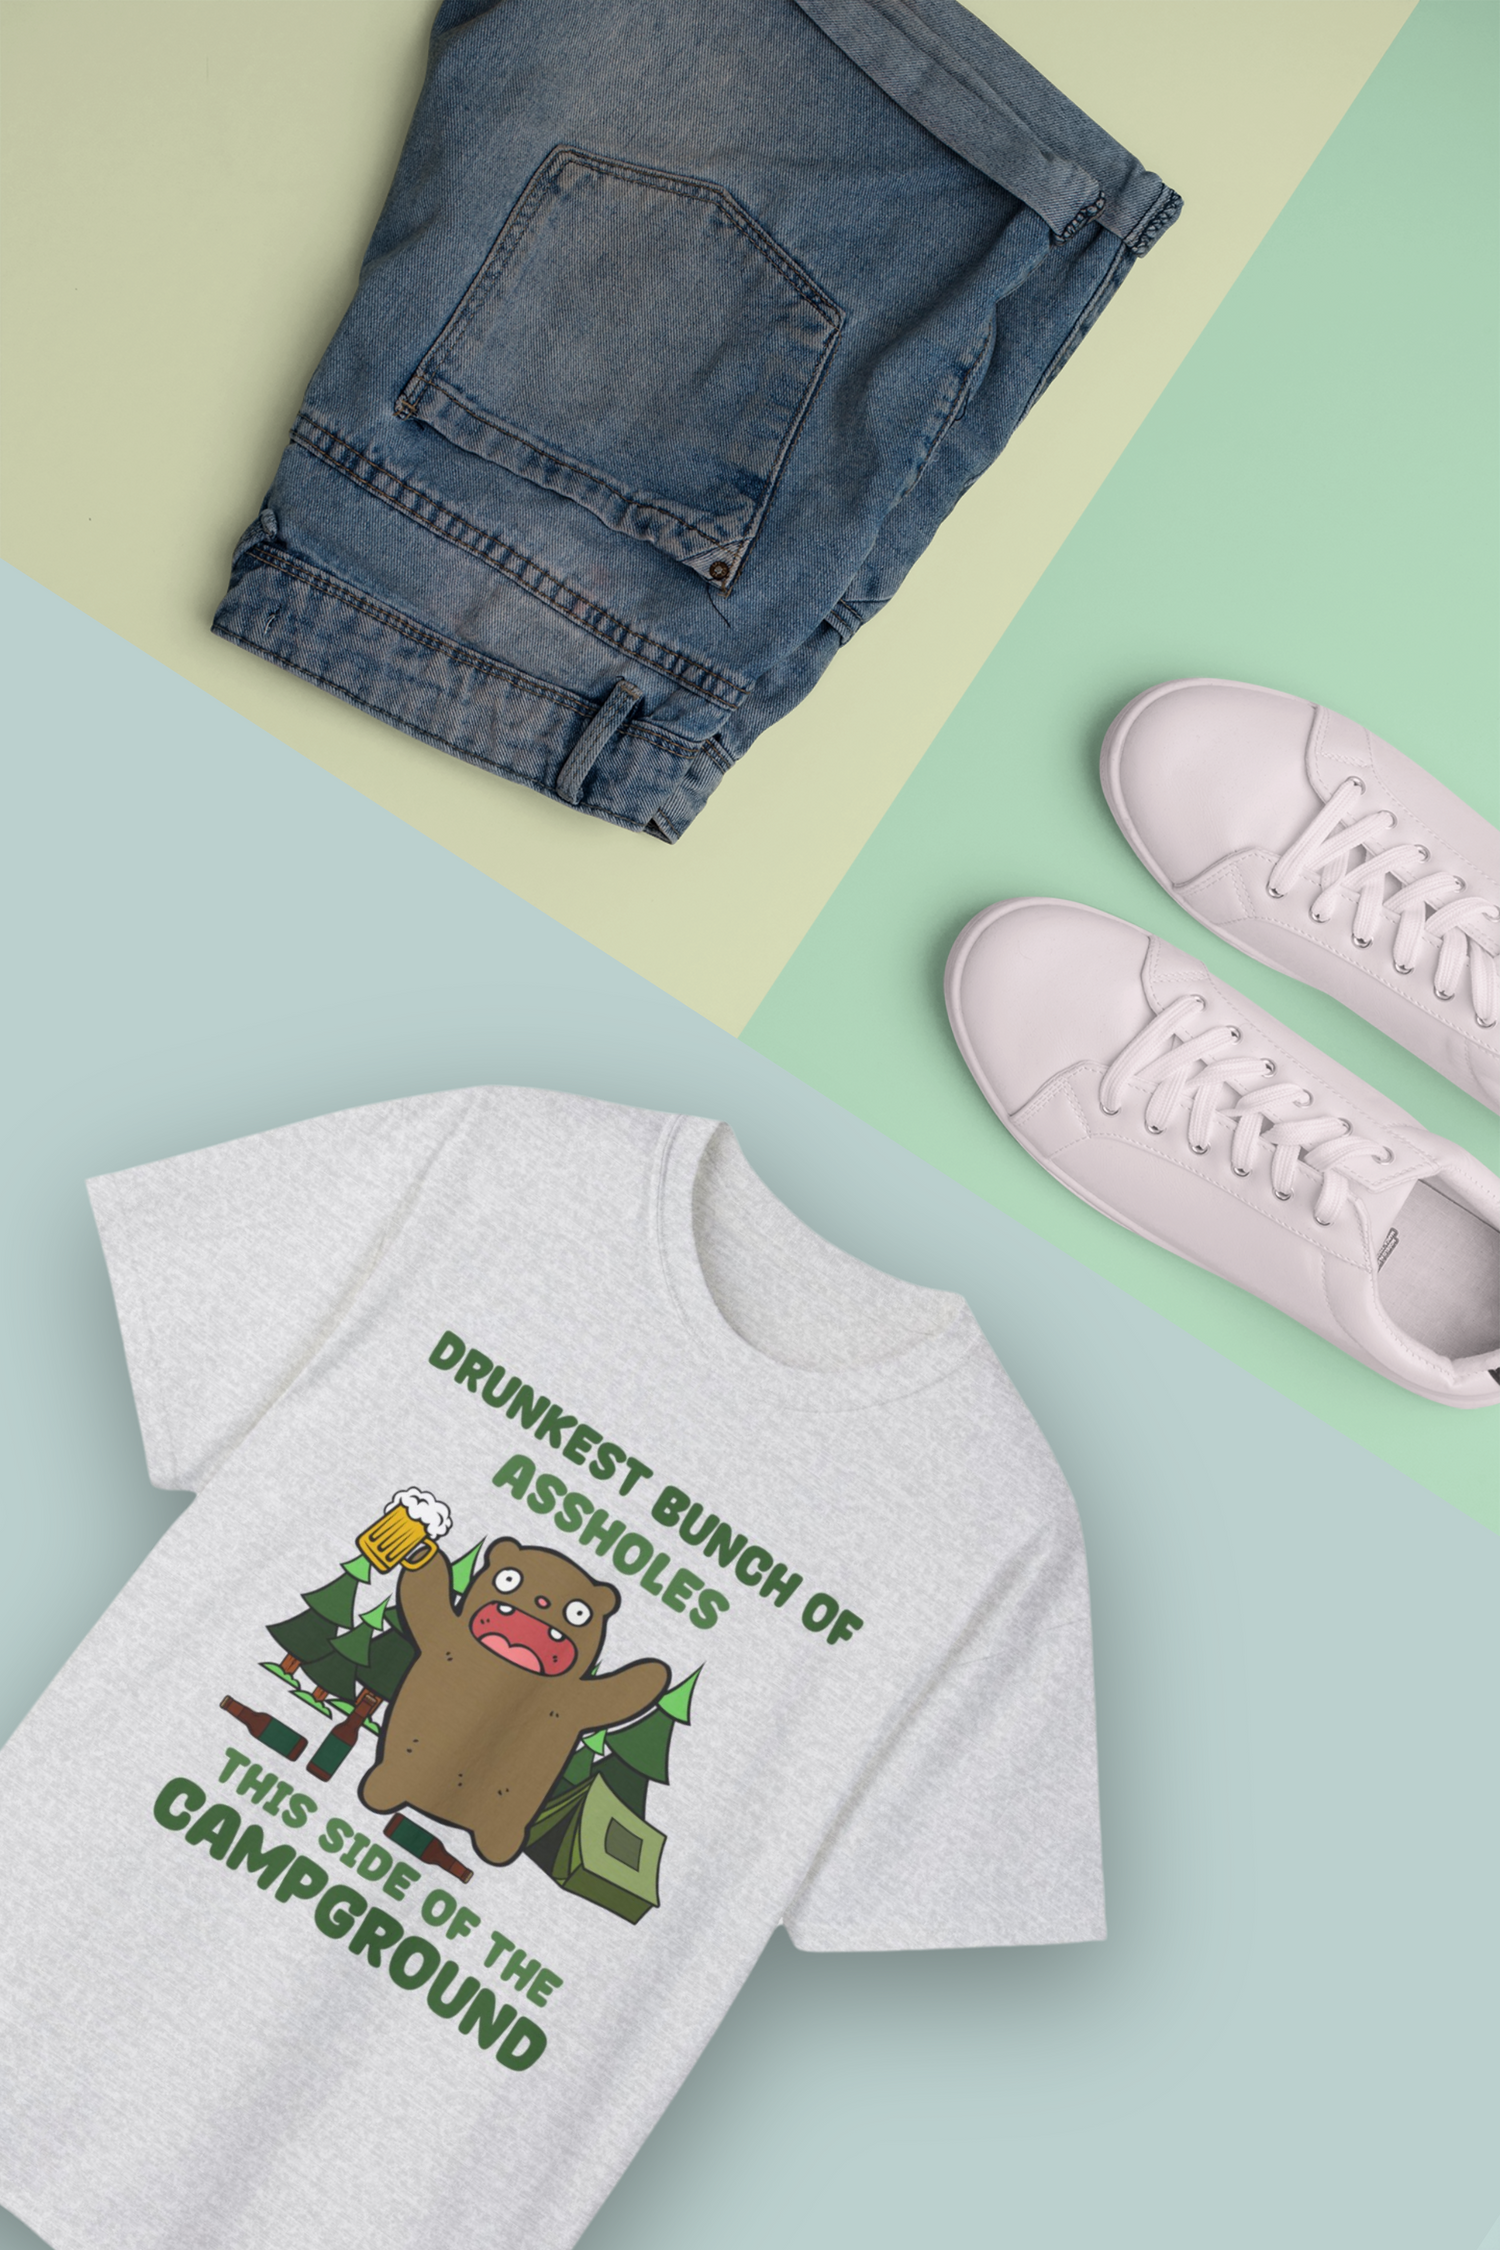 Casual camping outfit display featuring stylish t-shirts, jean shorts, and sneakers laid out on soft mint colours background, perfect for outdoor adventures